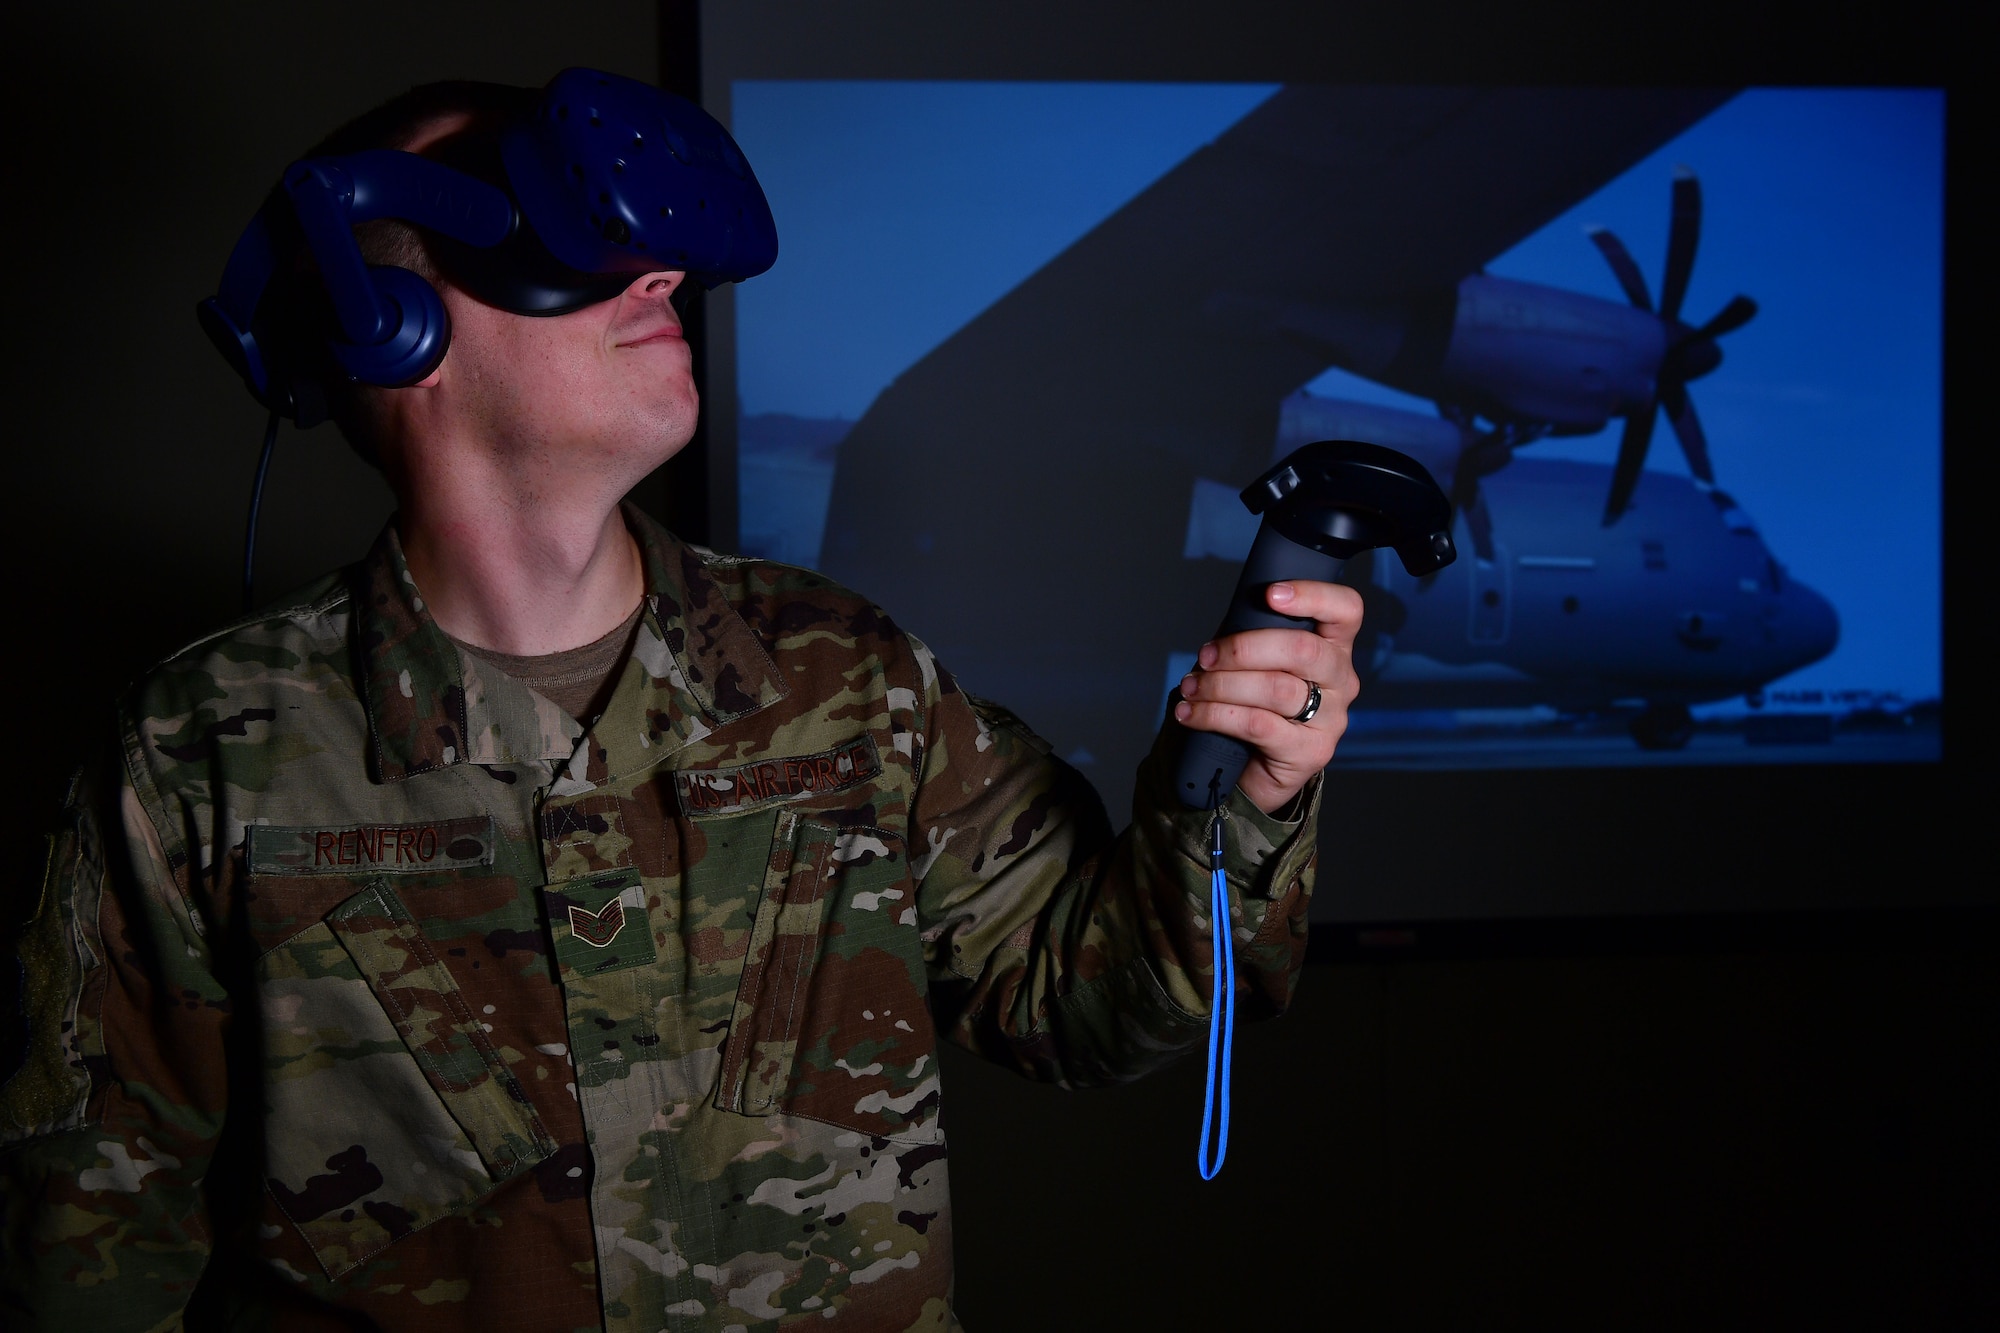 U.S. Air Force Staff Sgt. Kenneth Renfrow, 19th Maintenance Group maintenance qualifications training instructor, uses a virtual reality headset